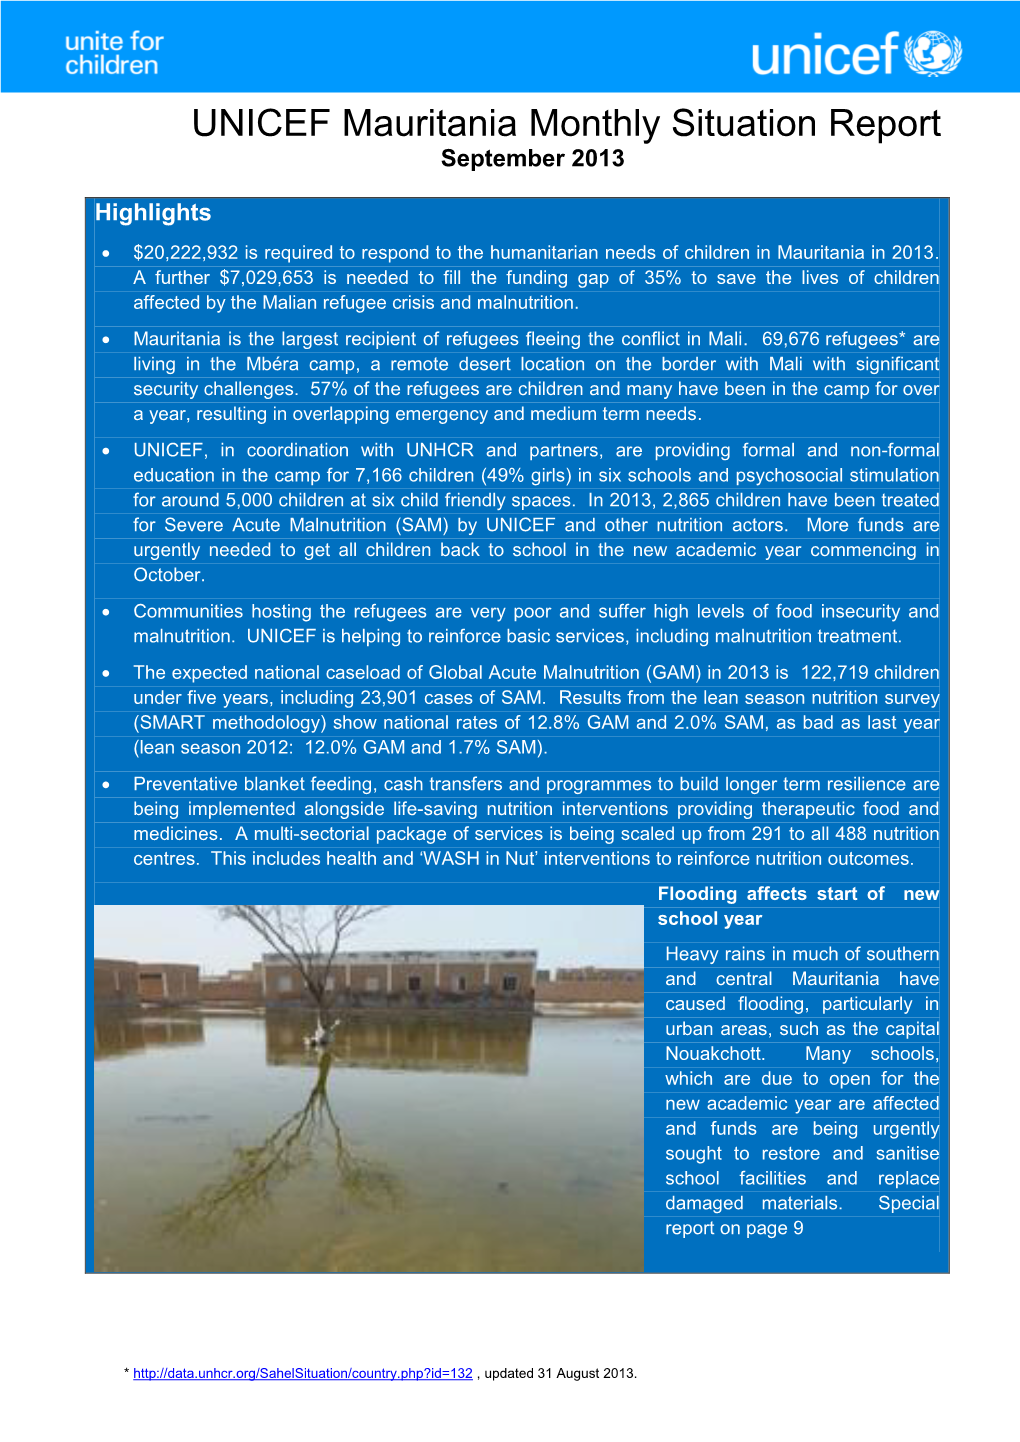 UNICEF Mauritania Monthly Situation Report September 2013